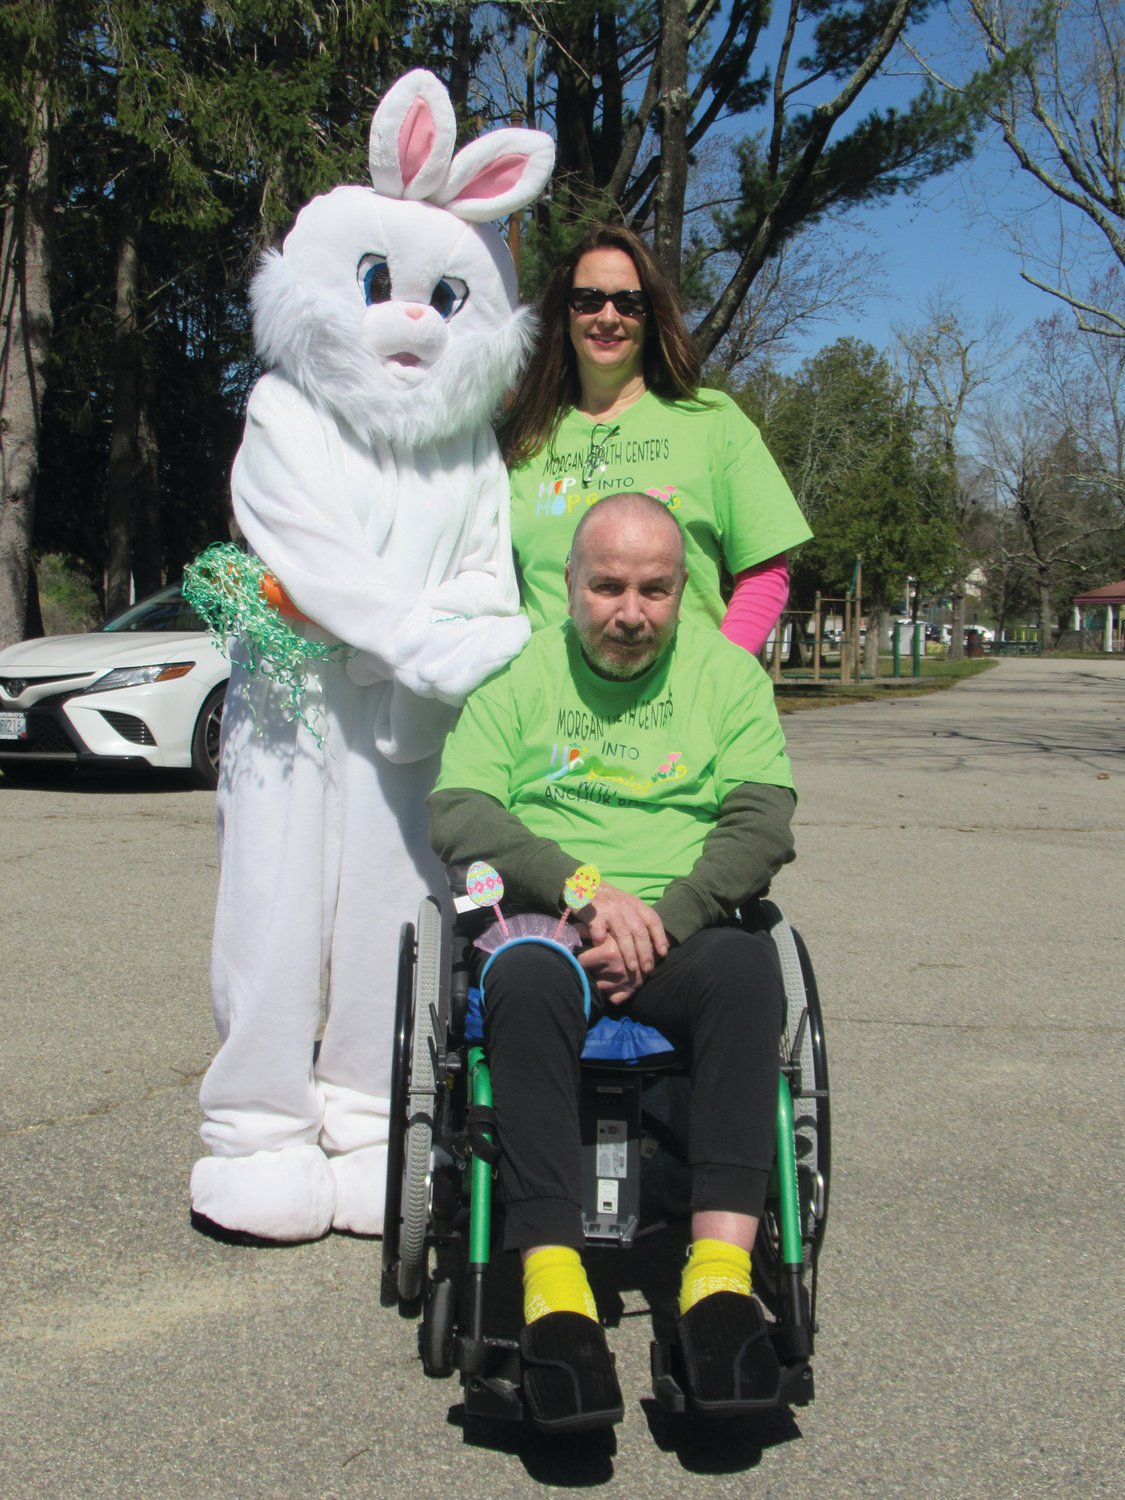 GRAND GREETING: The Easter bunny made sure Frank Garcia and Morgan Health Center staffer Ferreira enjoyed last week’s special Bunny Walk in Johnston.